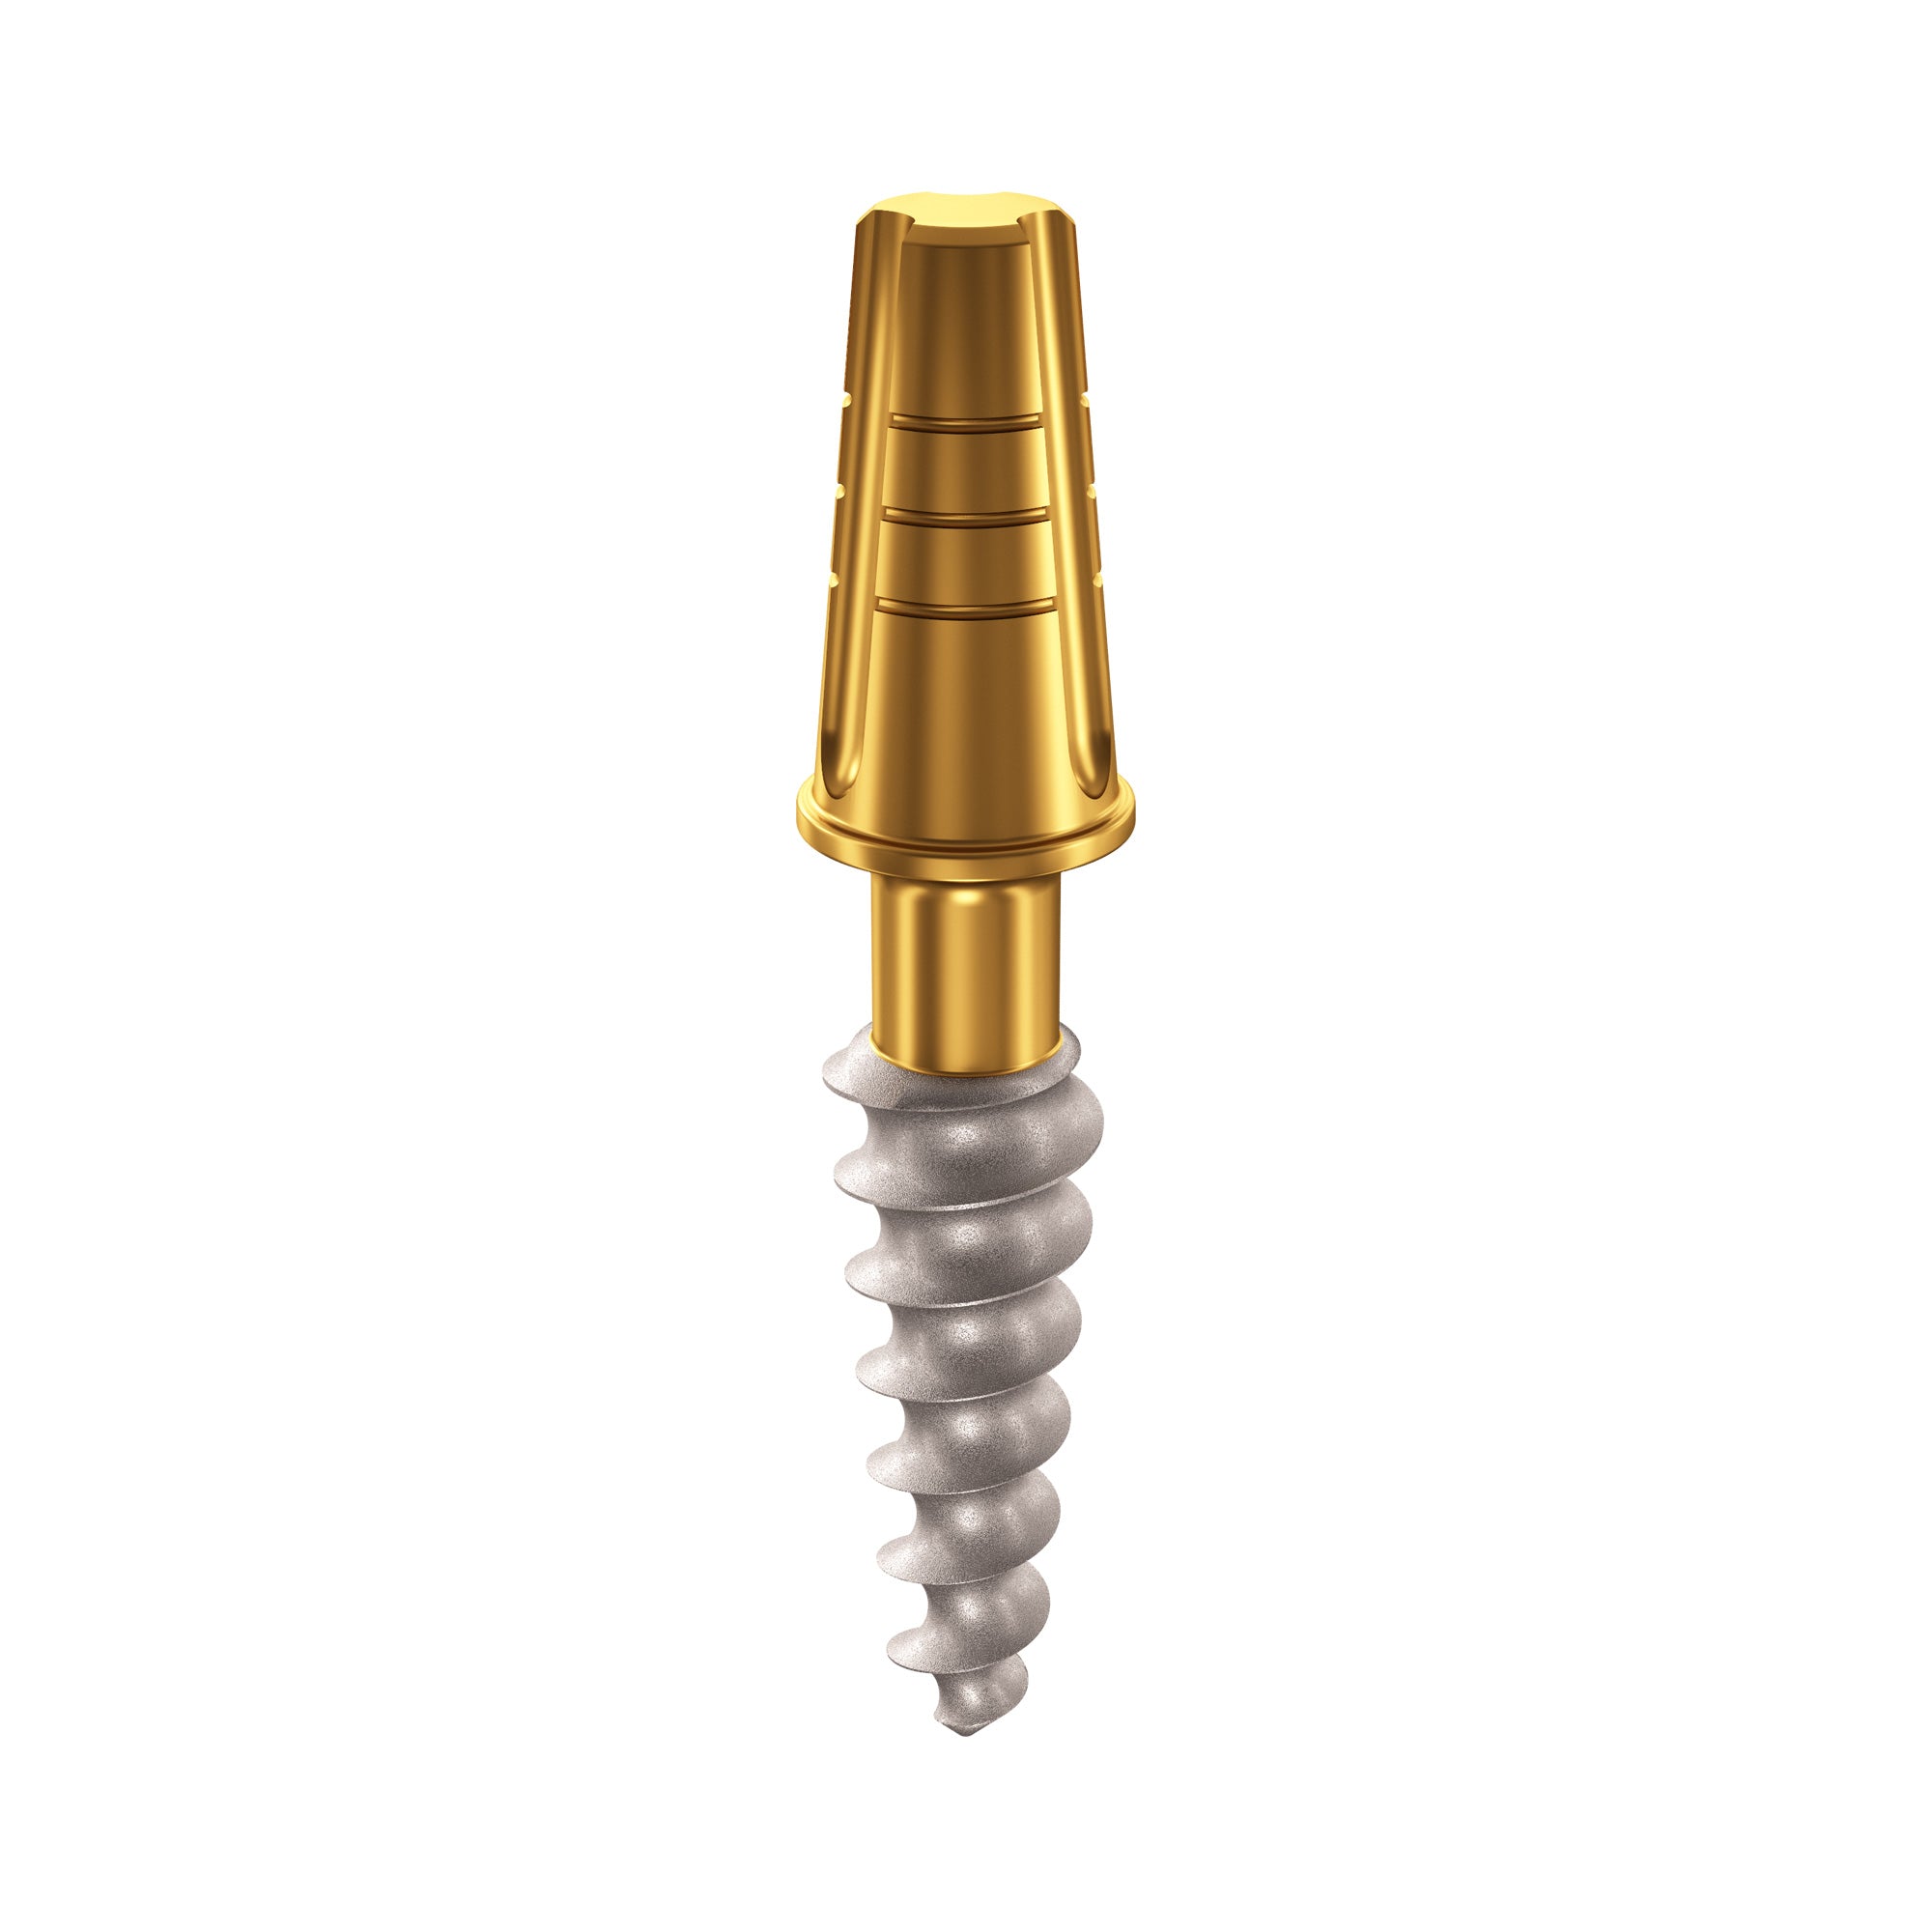 DSI One-Piece Root-shape Compressive Immediate Implant OPS Short Neck